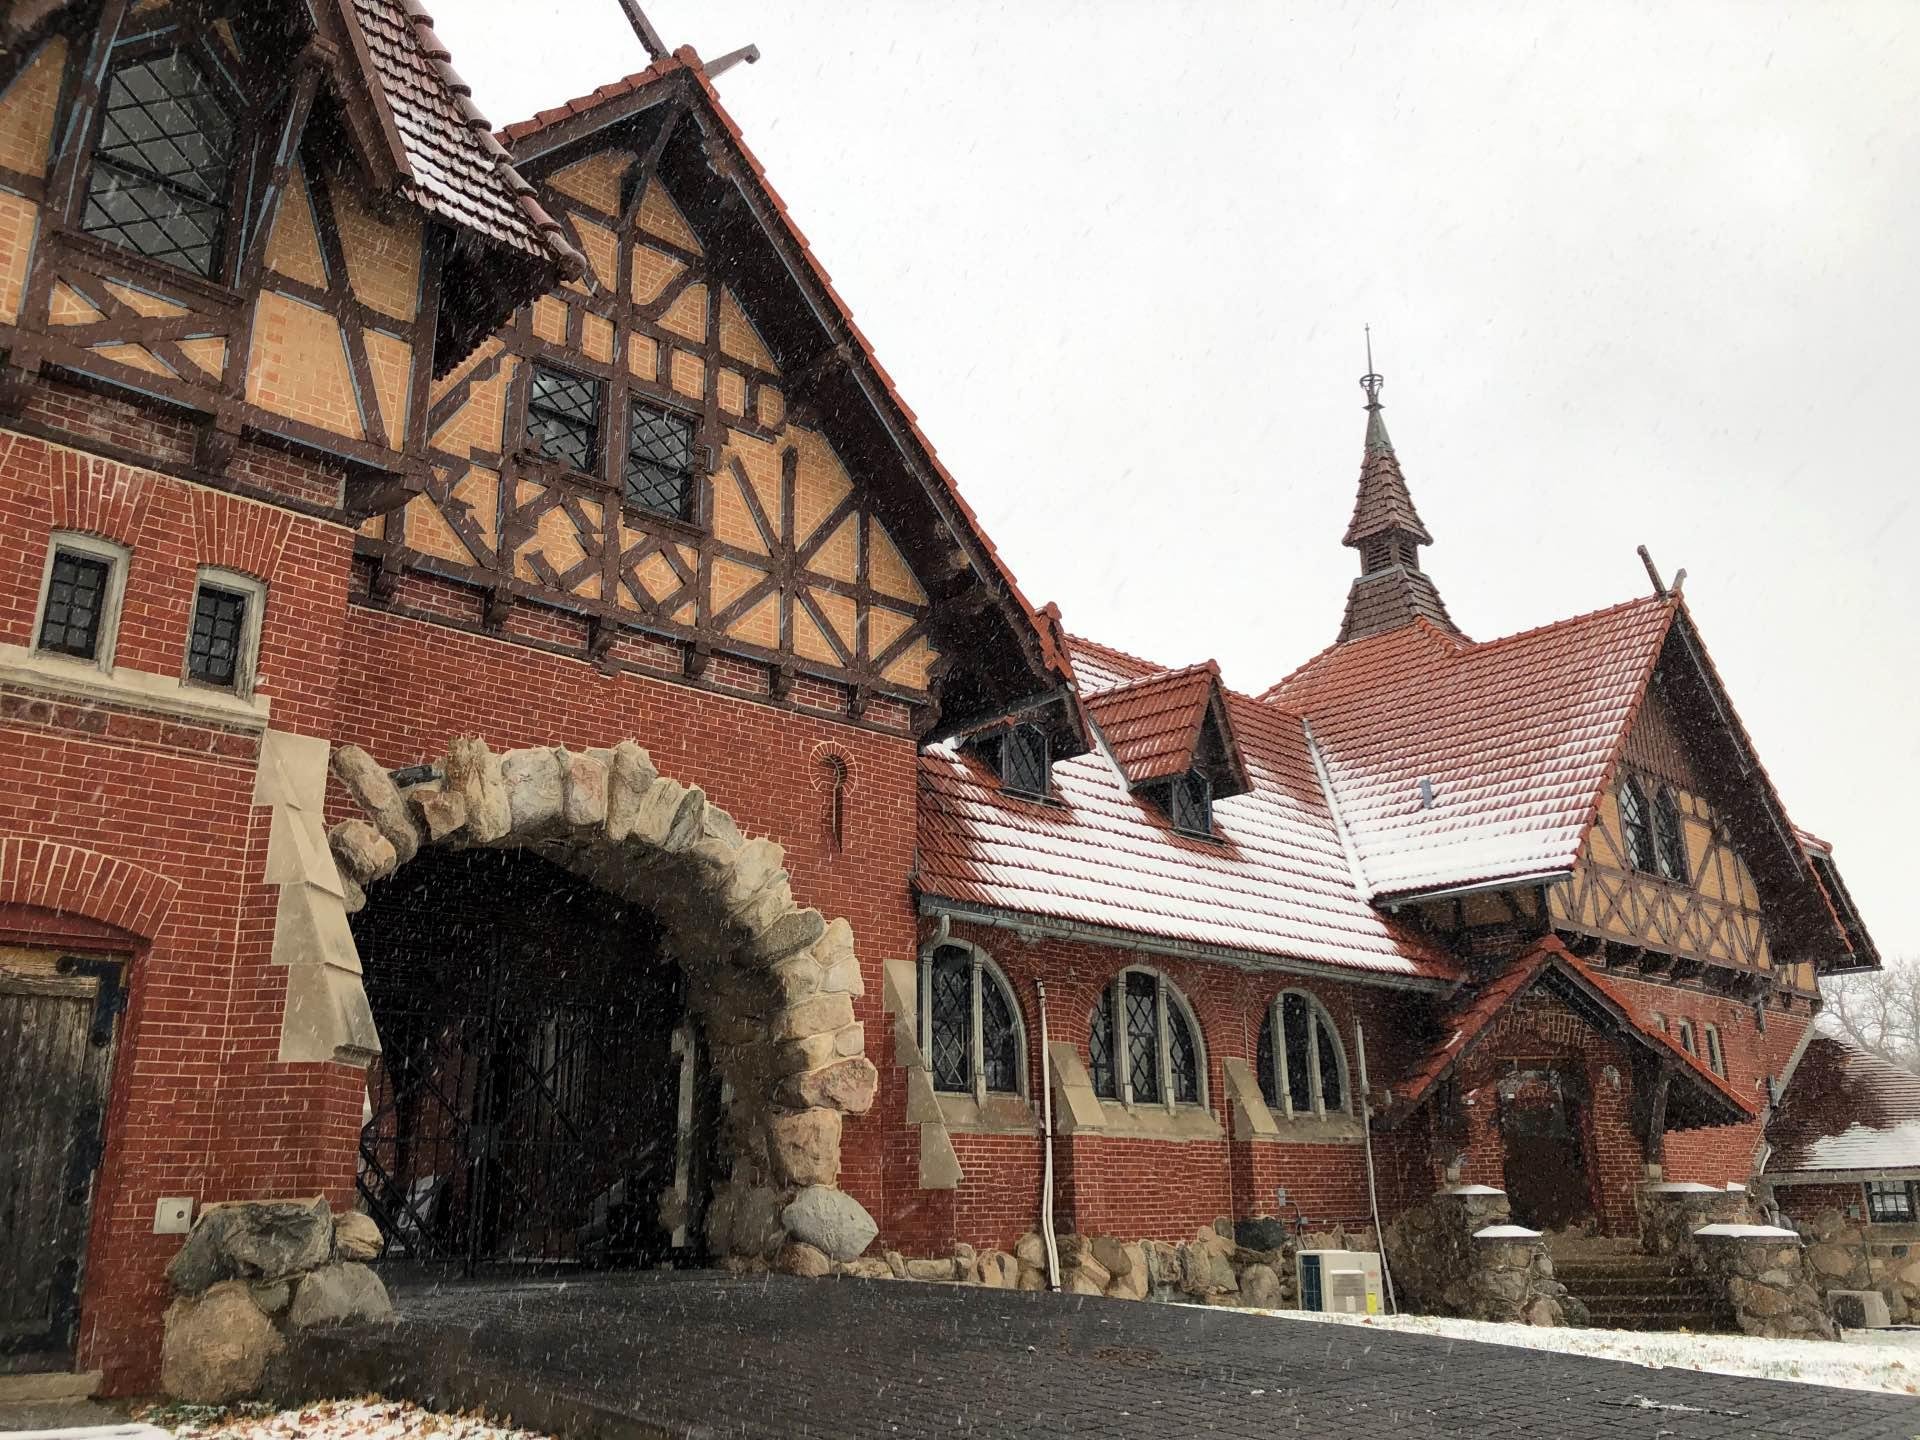 During a typical review process, the proposed archive facility would be expected to mimic or incorporate details of the landmarked Receptory Building and Stable, such as the stone, brick, tile and rooflines. (Patty Wetli / WTTW News)